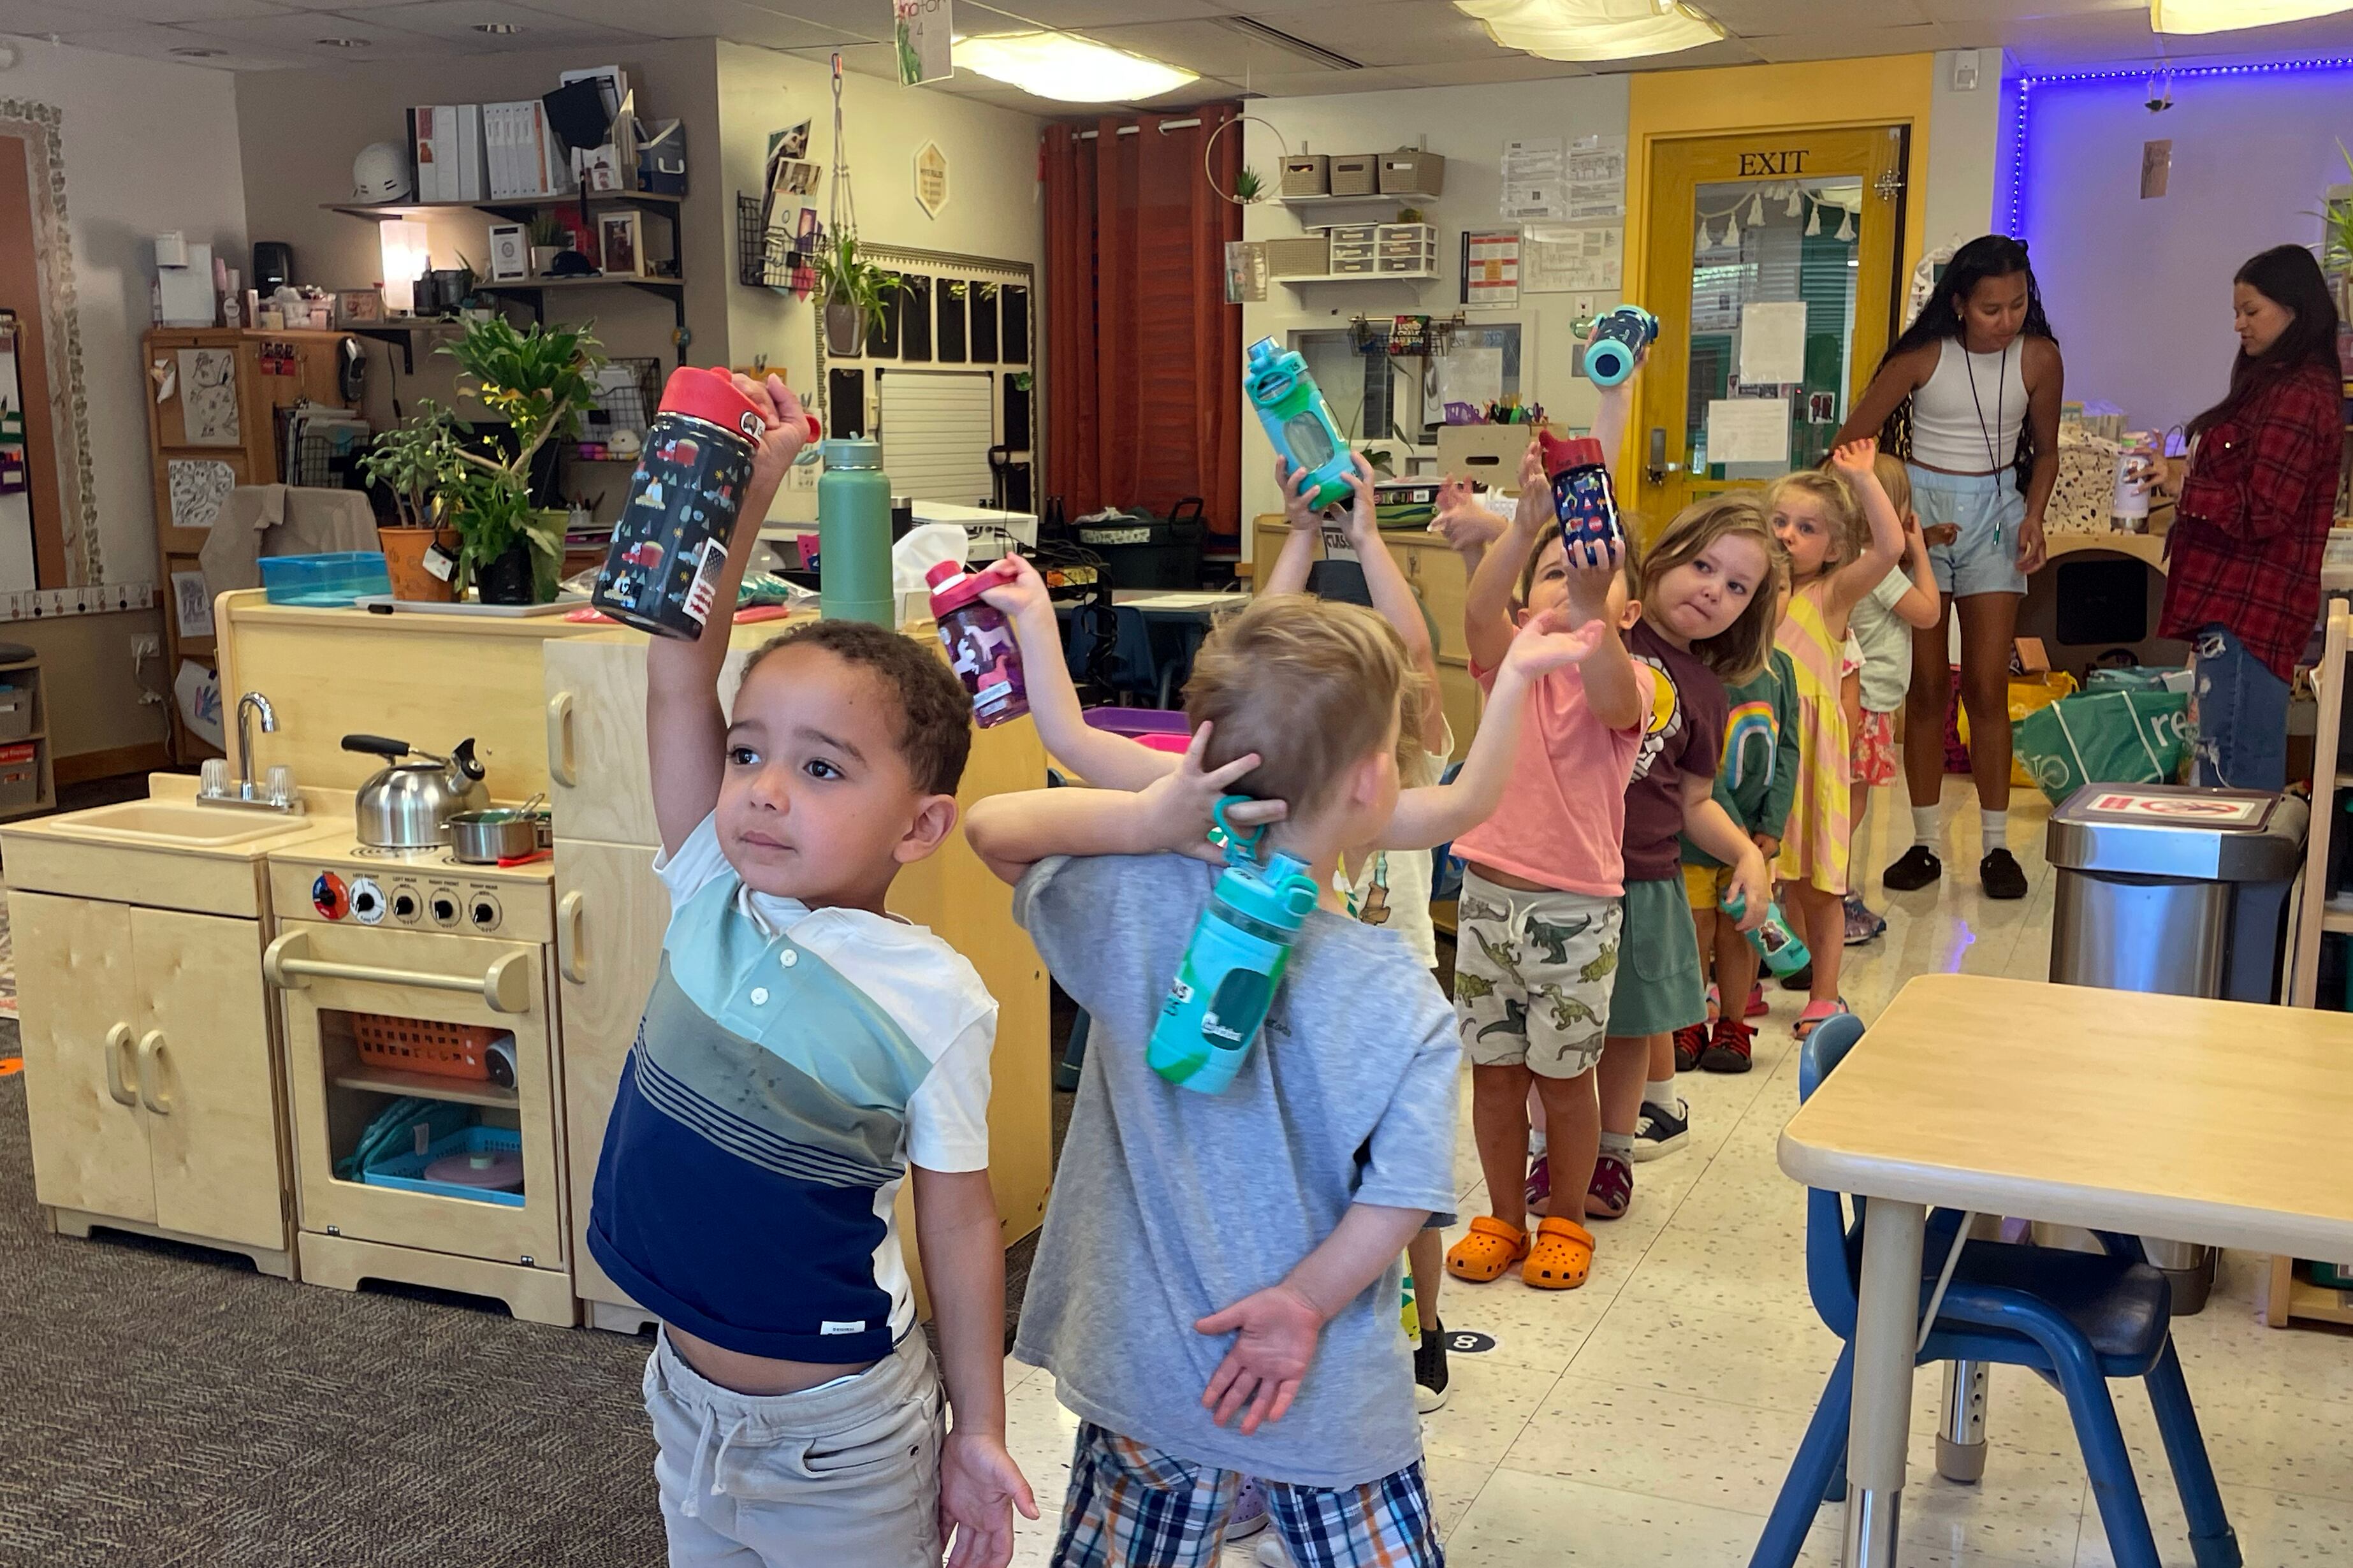 Preschool students in a line hold water bottles over their heads.